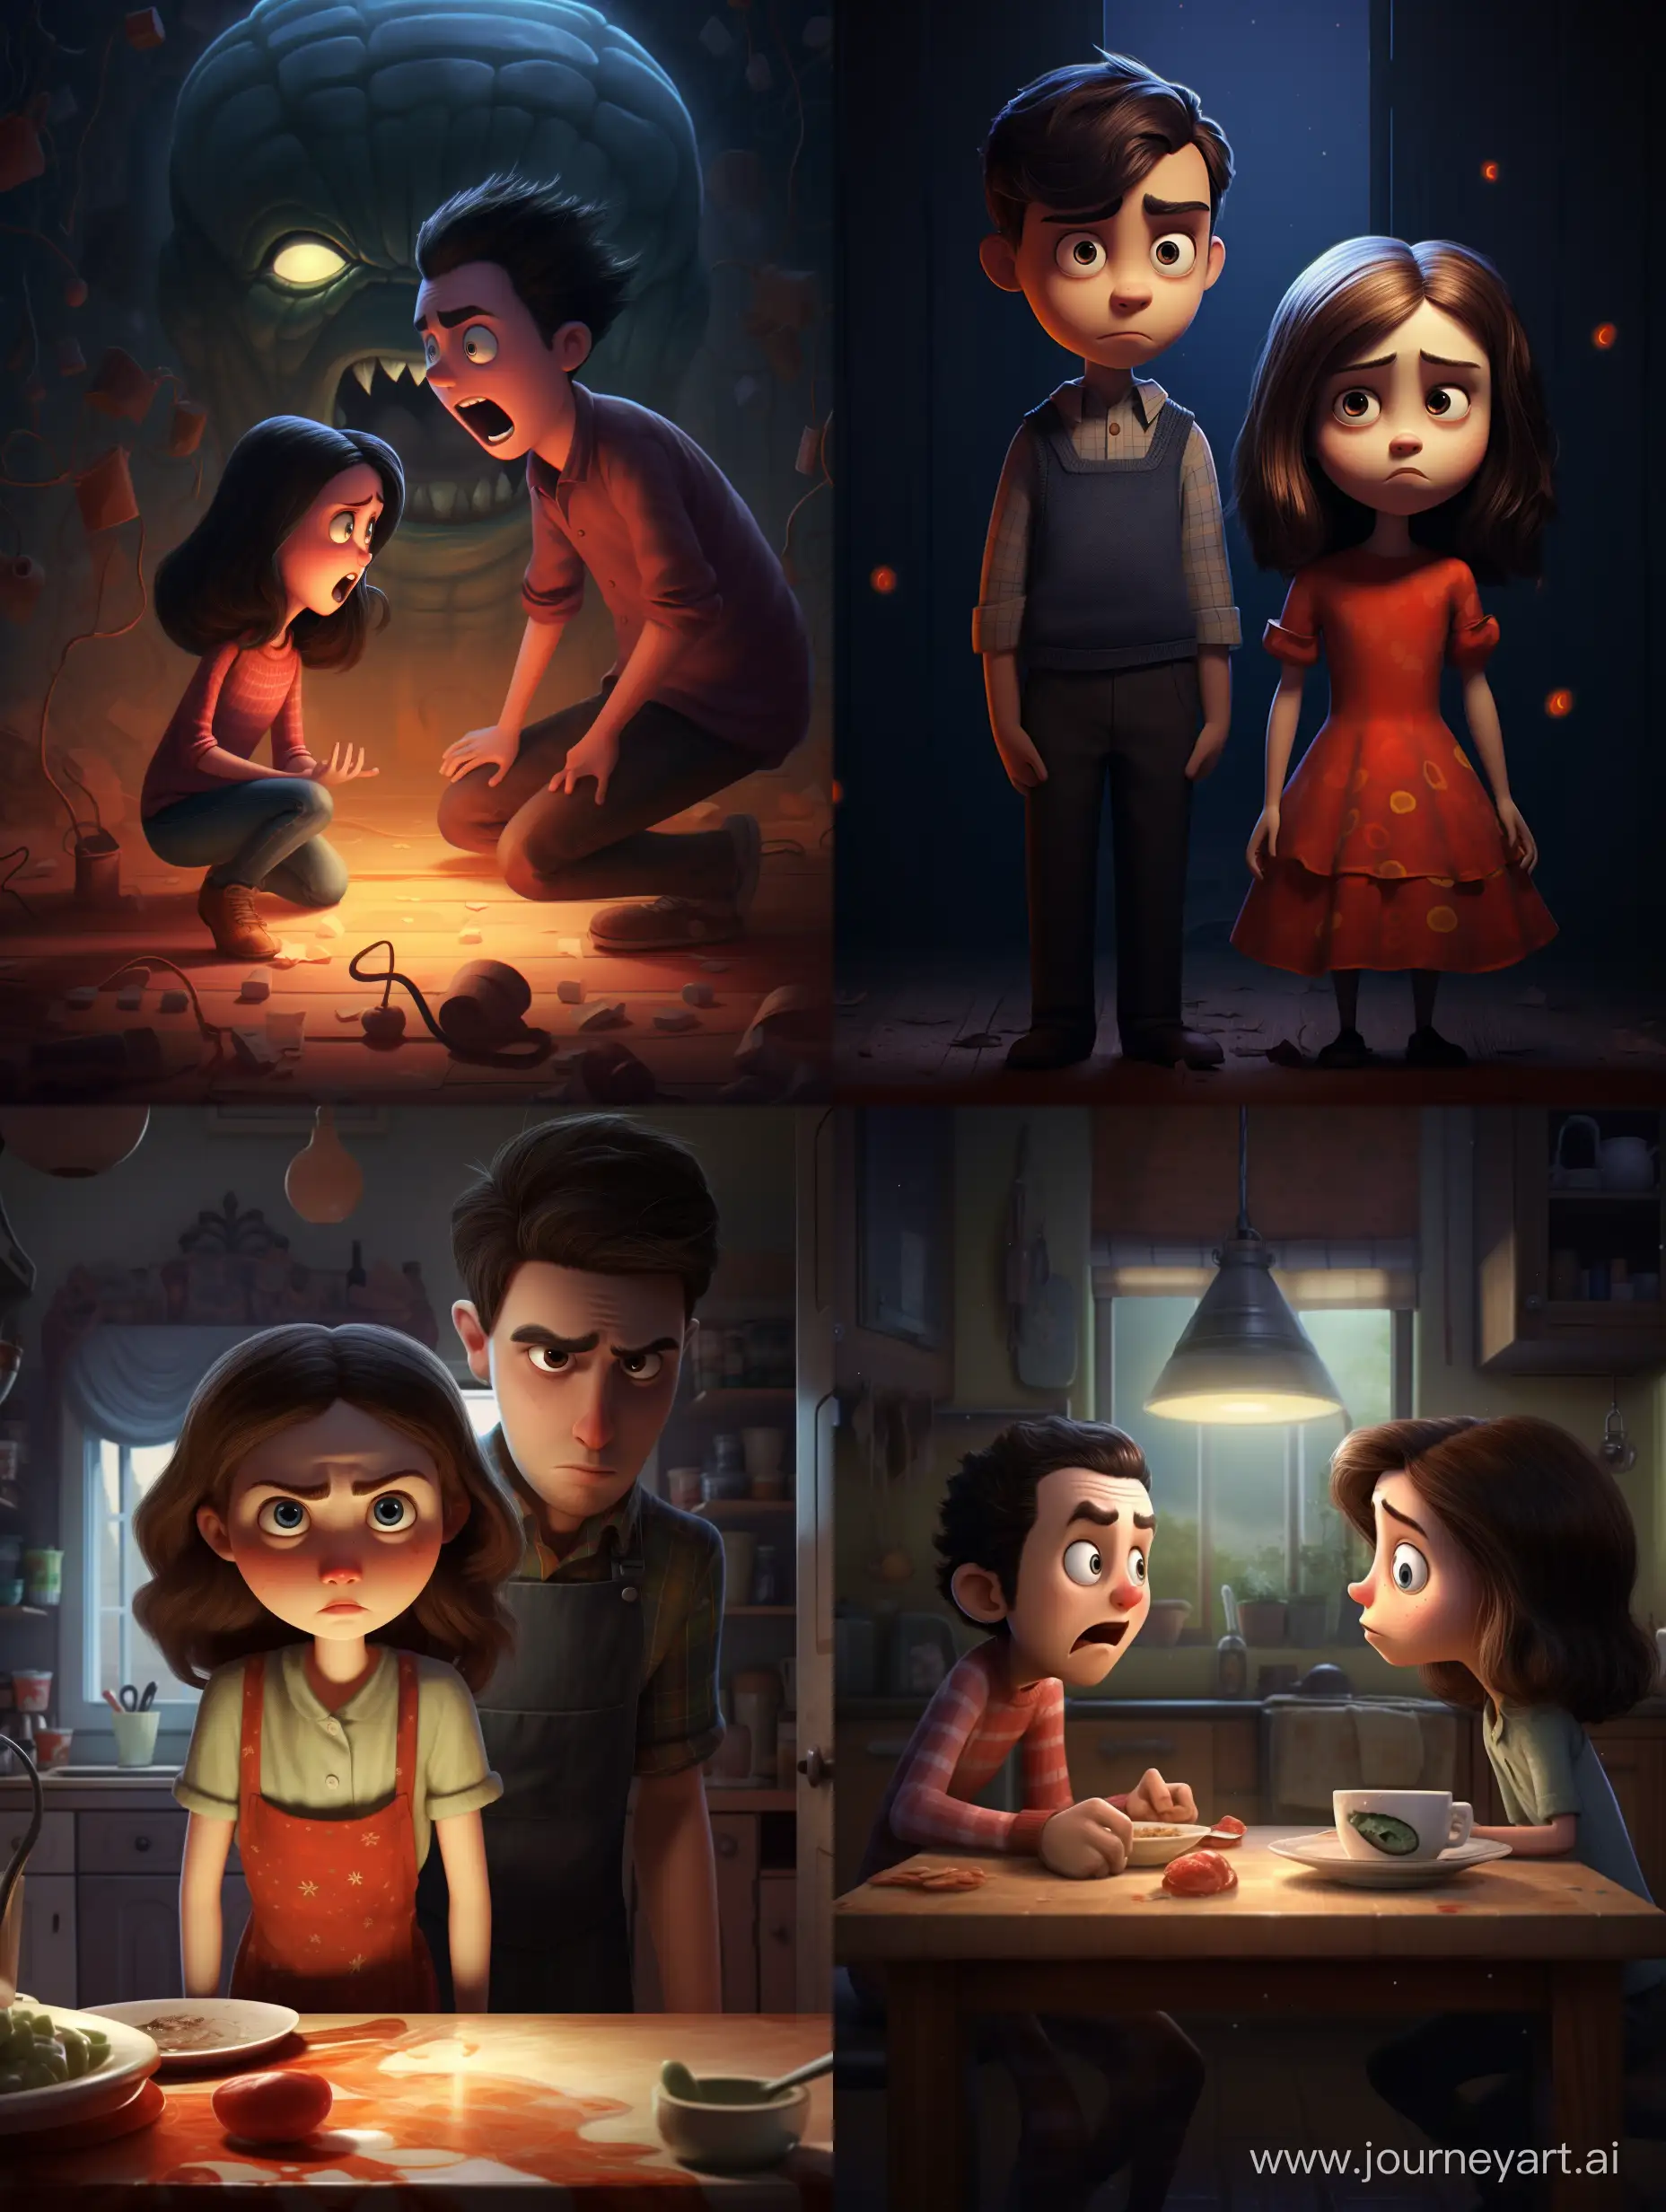 Confrontation-in-Pixar-Style-Intense-Family-Argument